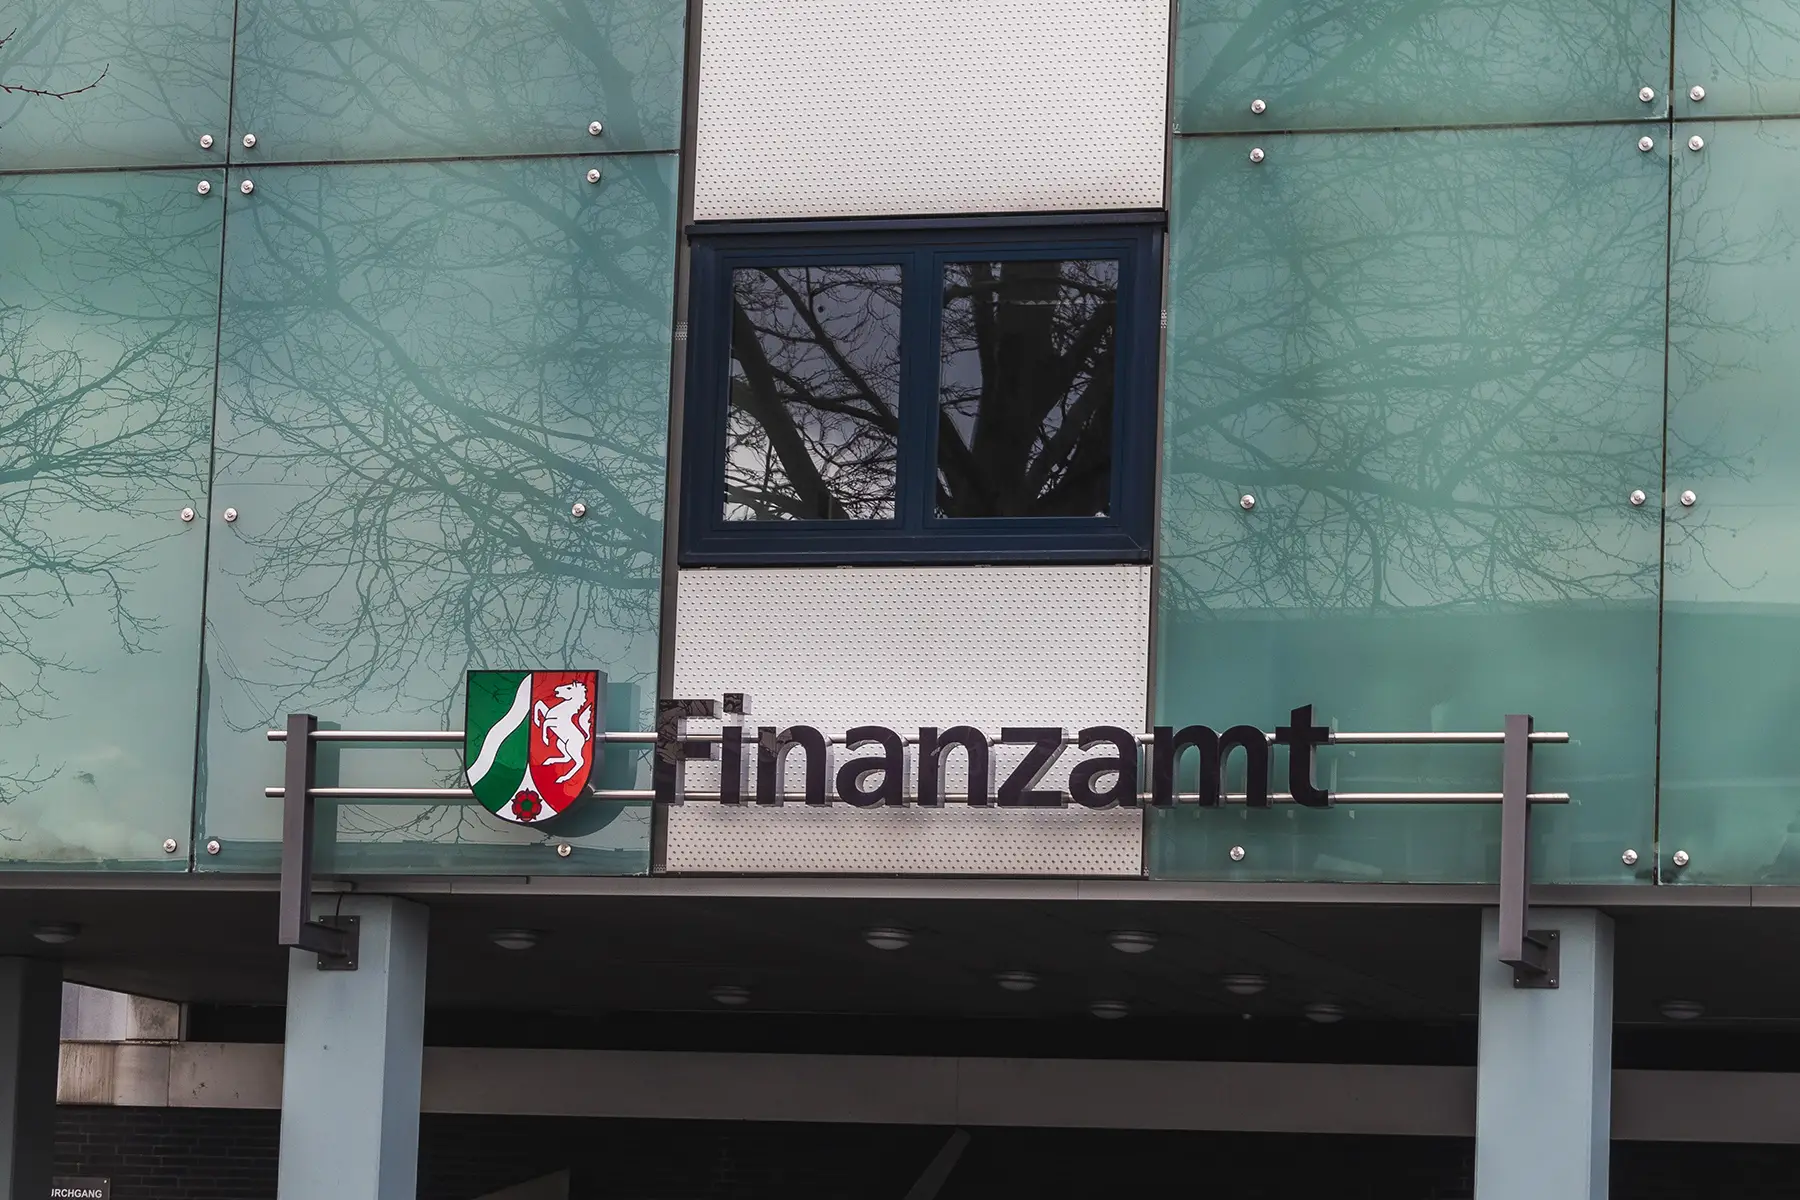 Outside sign of the finanzamt office in Paderborn, Germany.